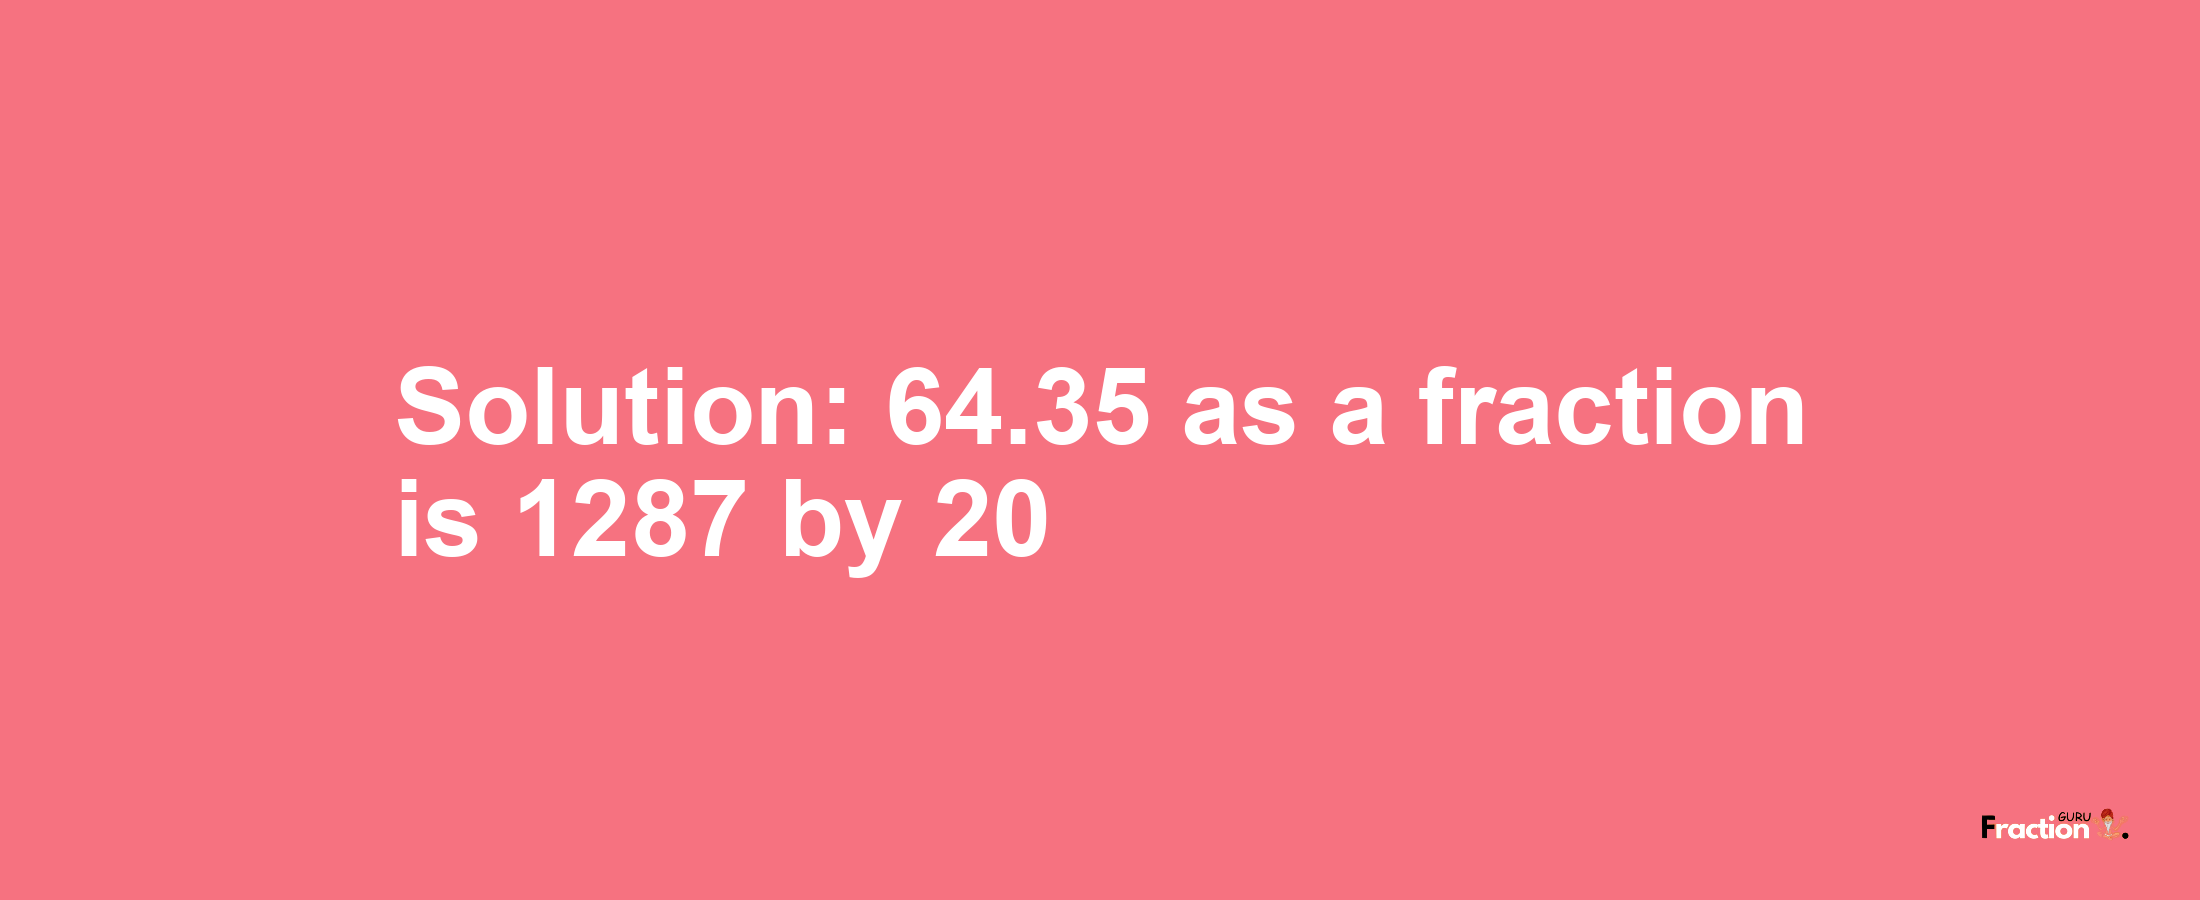 Solution:64.35 as a fraction is 1287/20